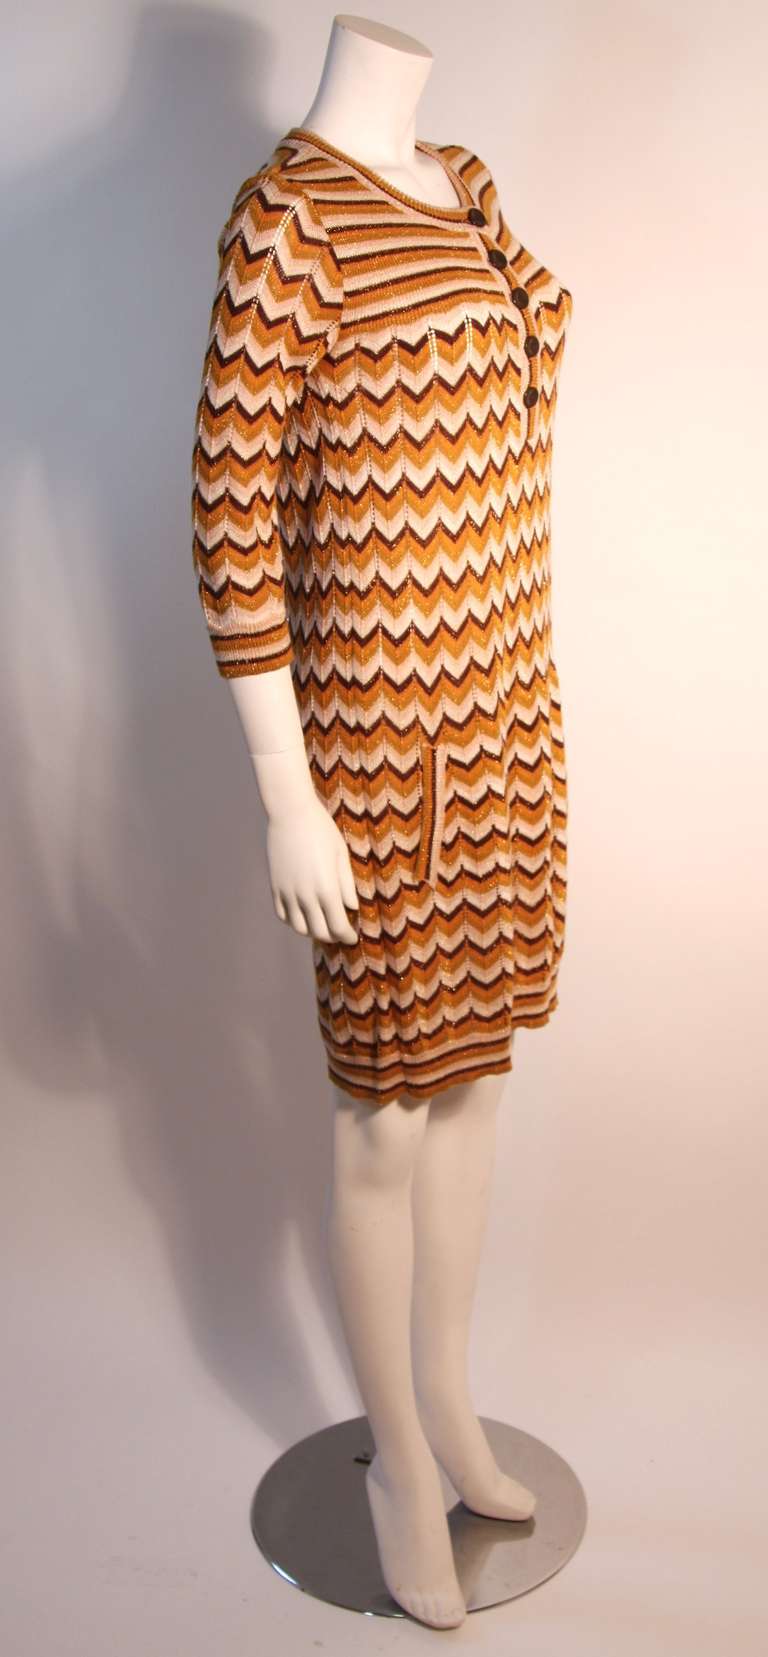 This knit dress is fashioned by Missoni. It has wonderful neutral hues with a hint of metallic threading. 

Measurements (Approximate):
Length (Back of Neck to Hem): 37